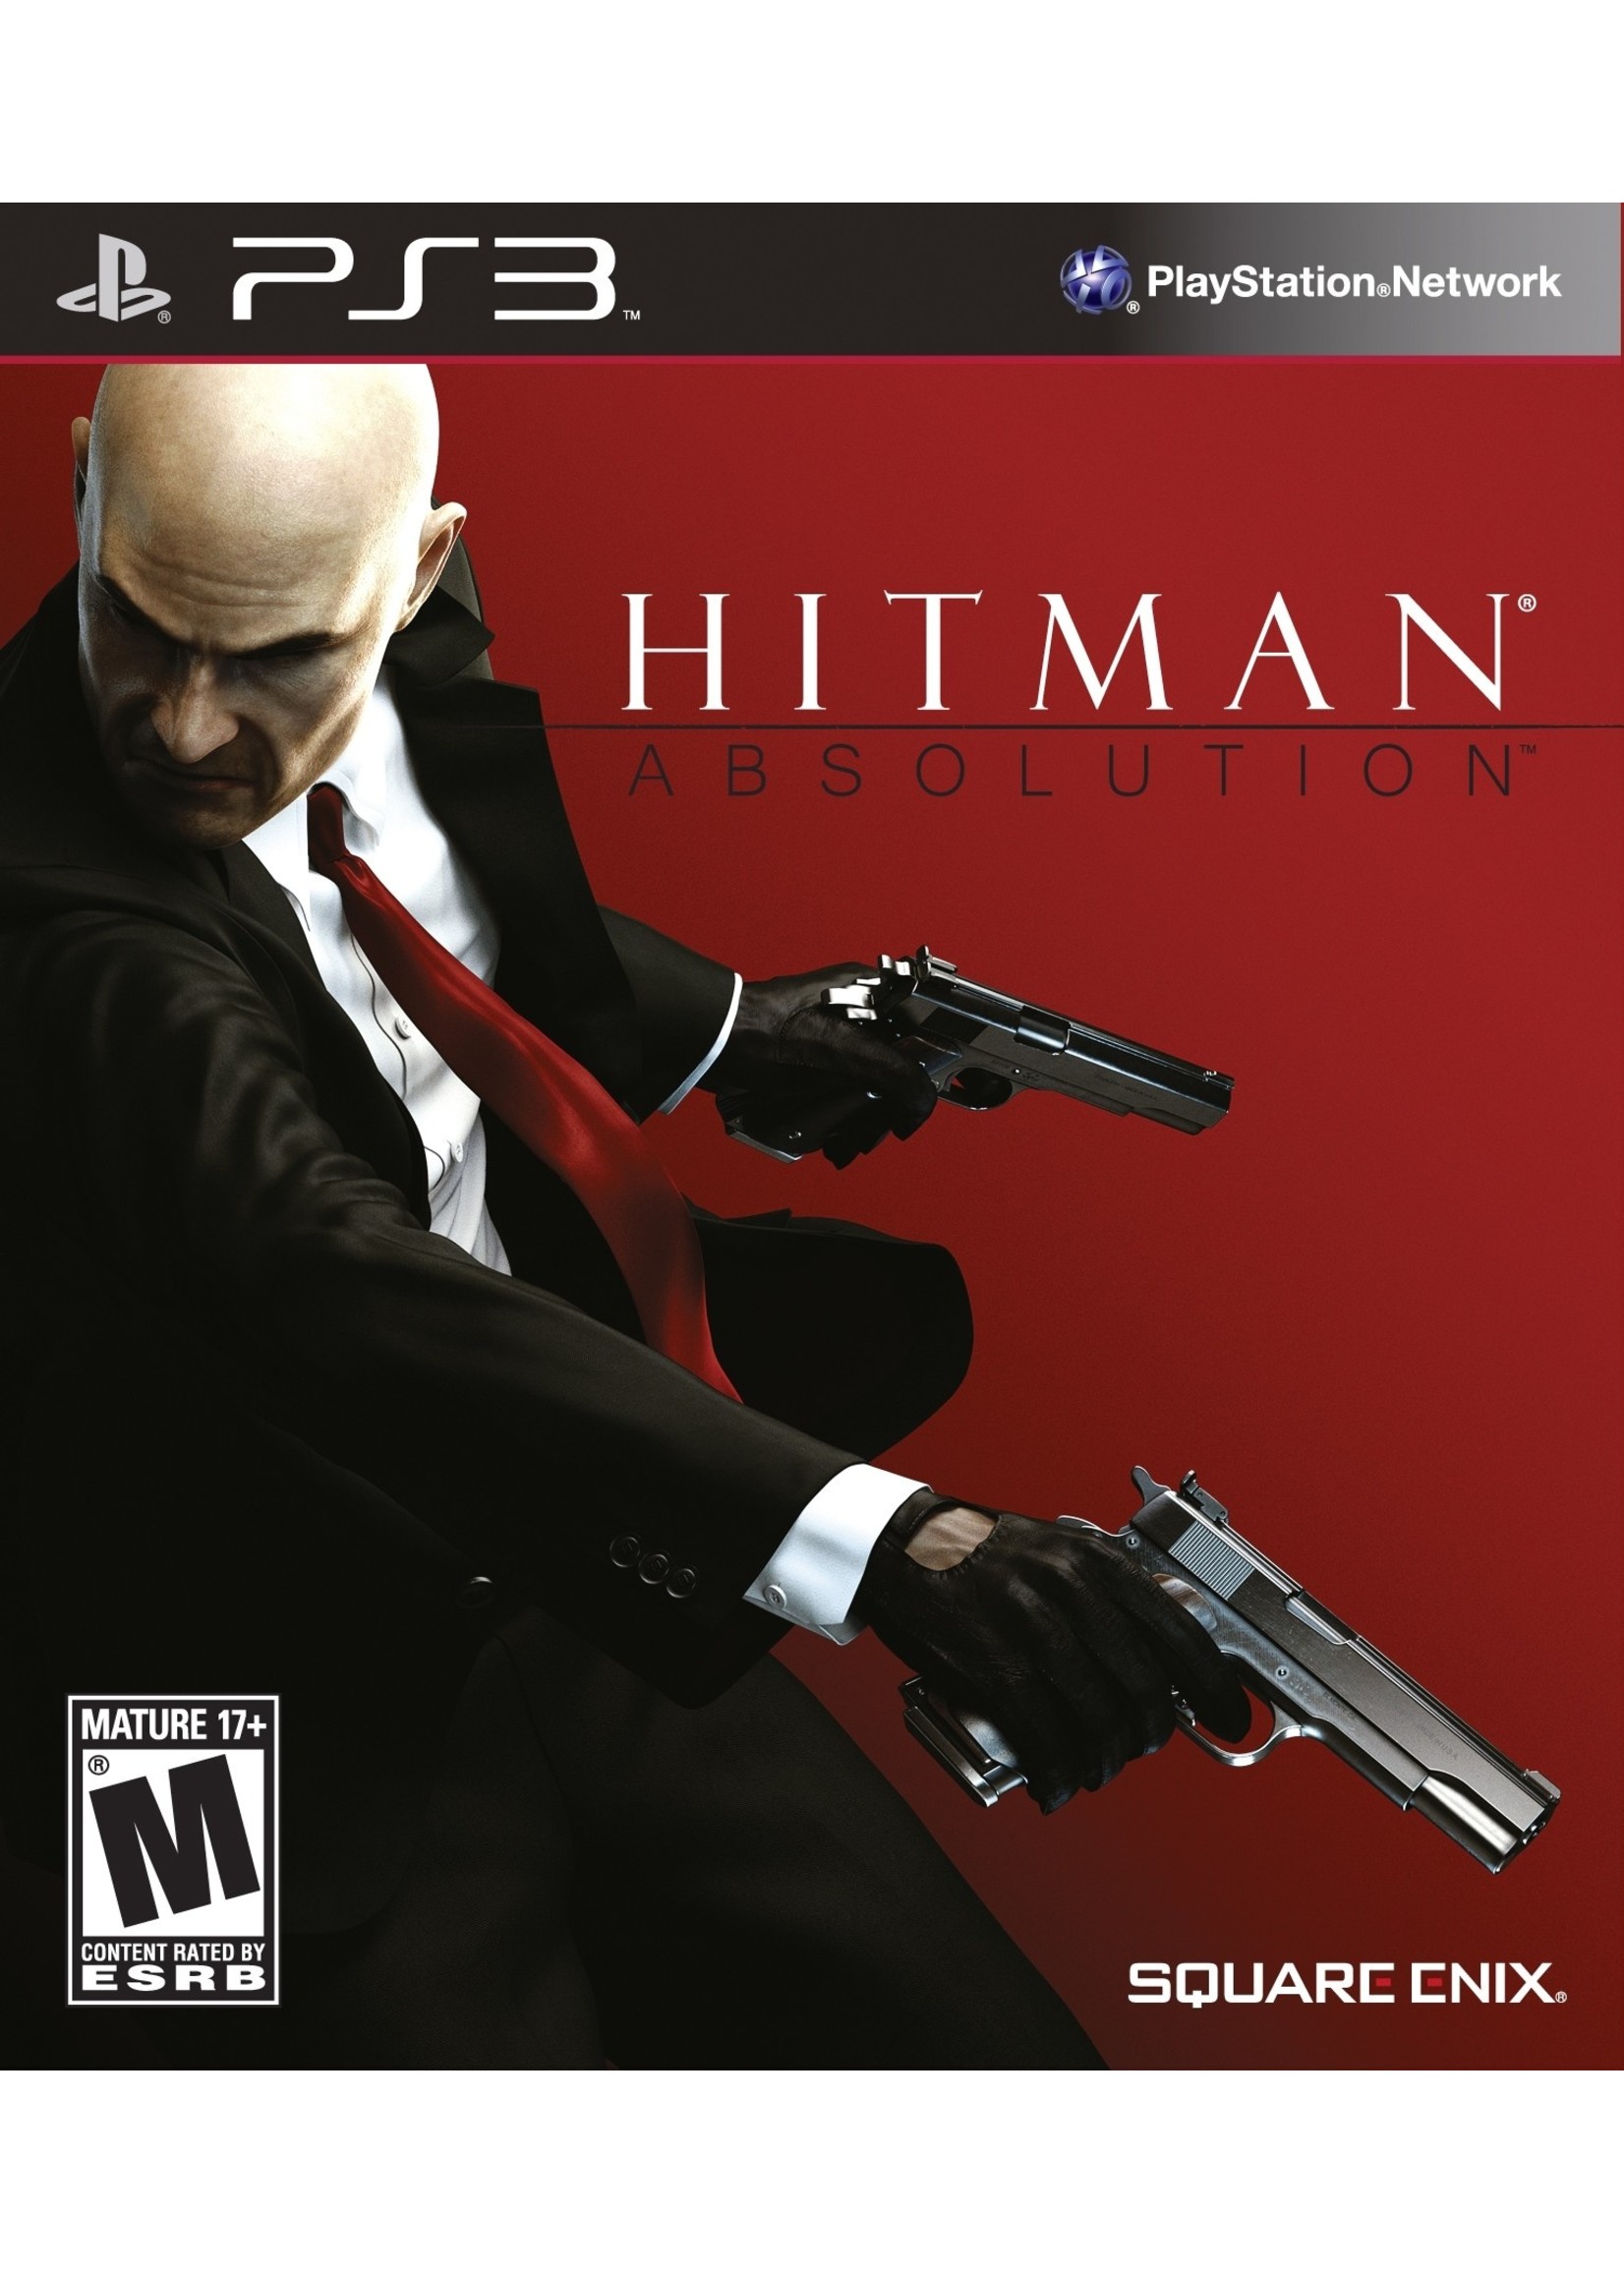 Sony Playstation 3 (PS3) Hitman Absolution